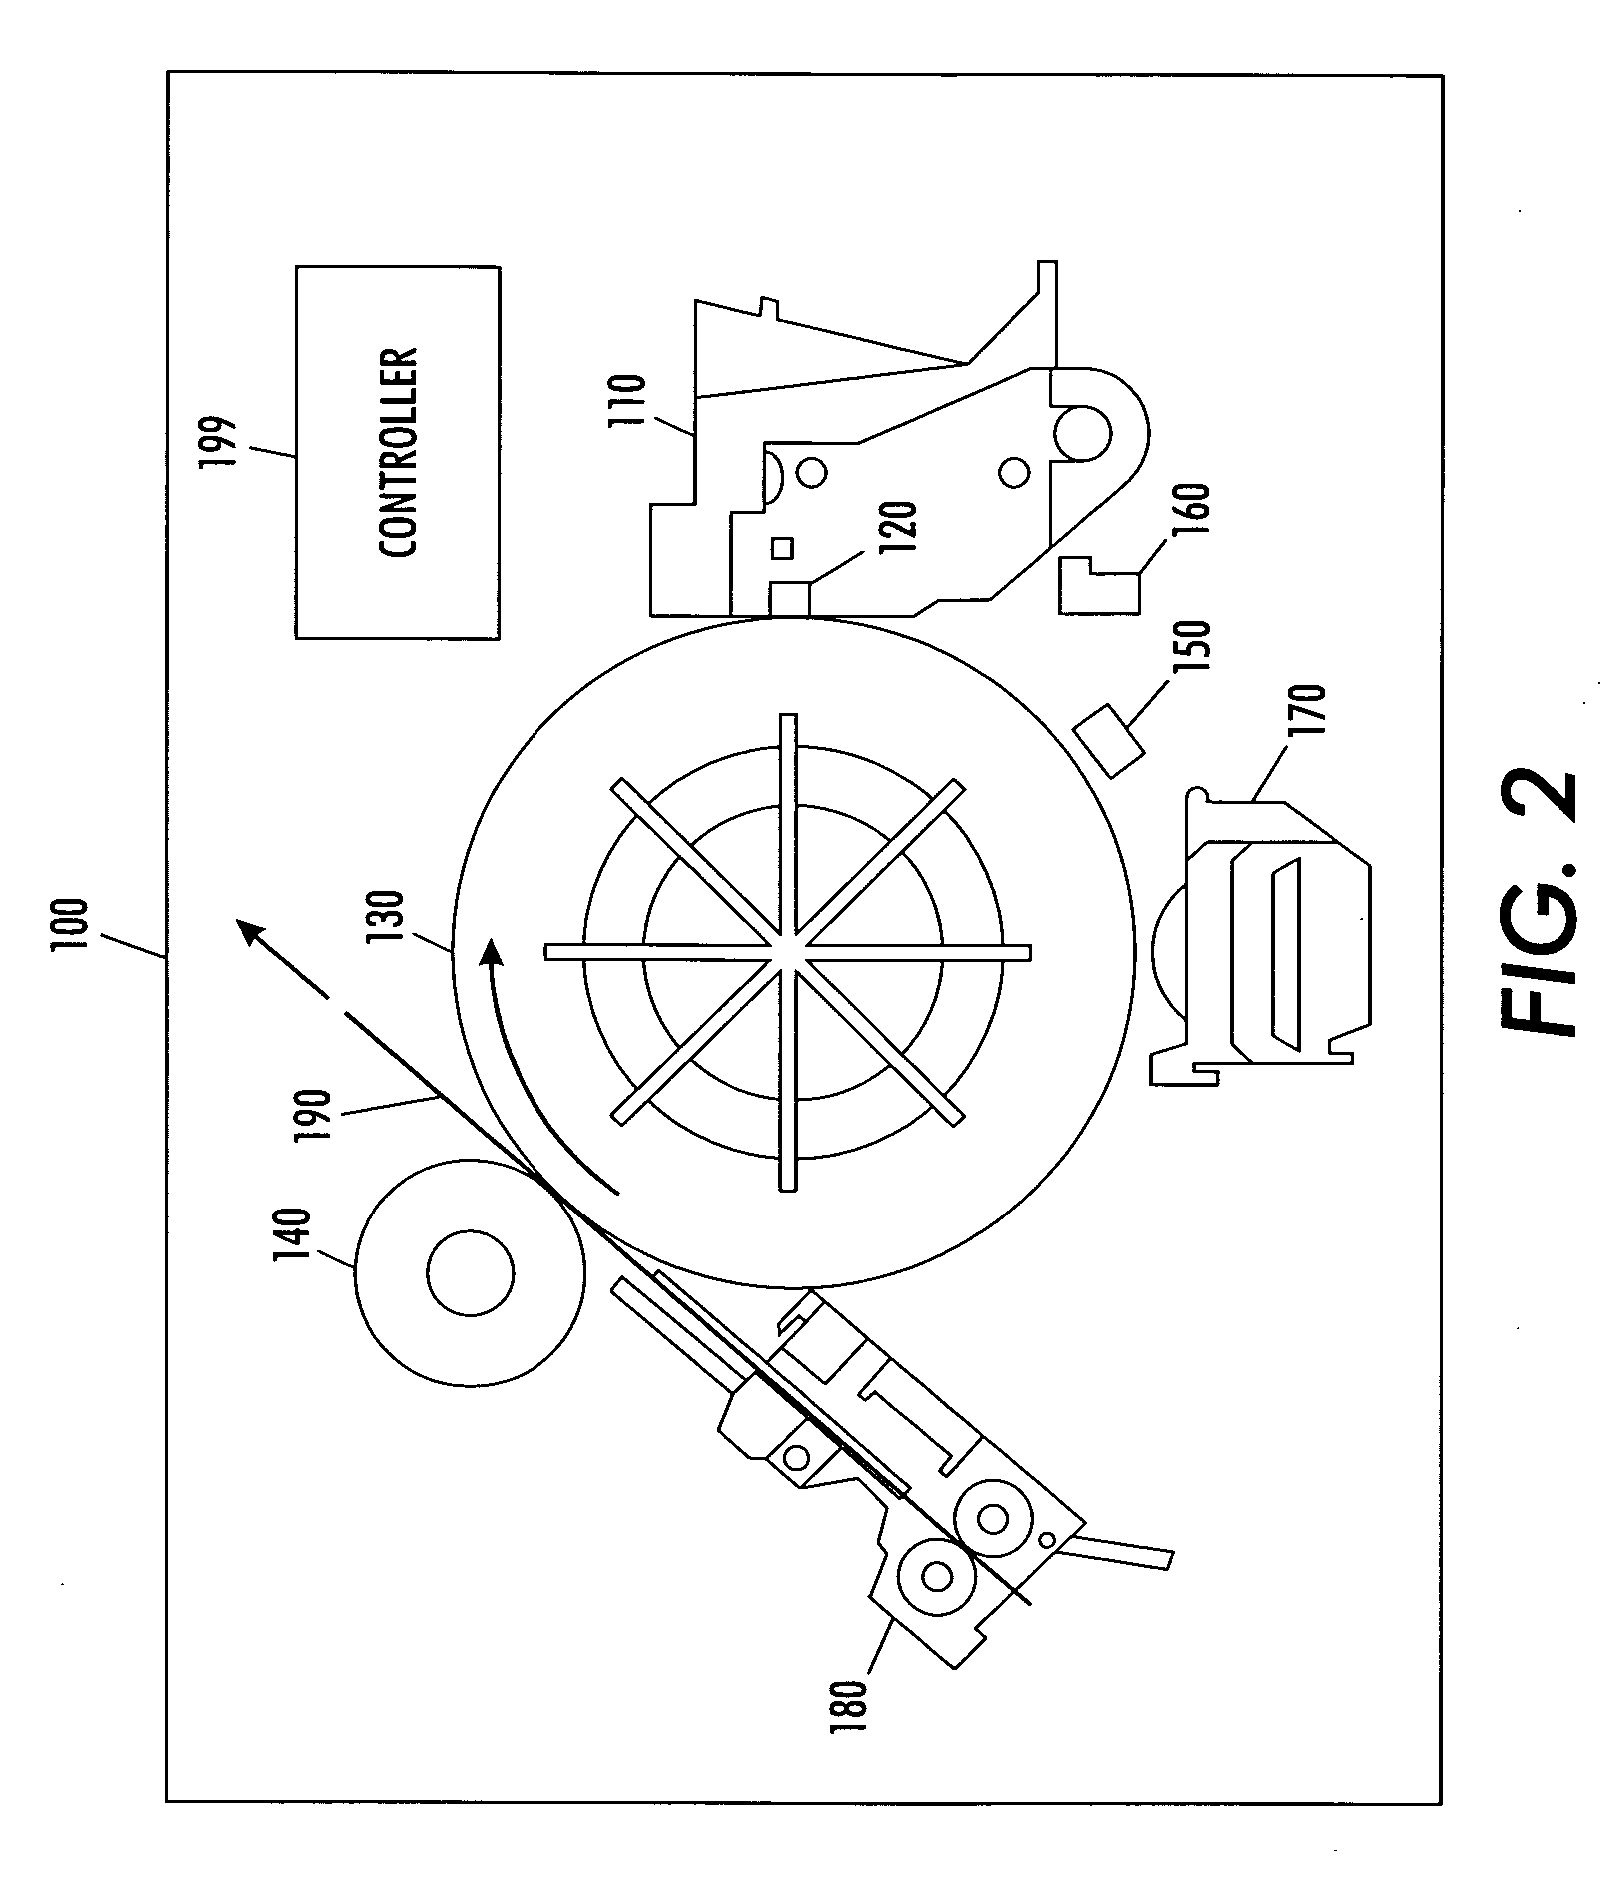 Systems and methods for print head defect detection and print head maintenance